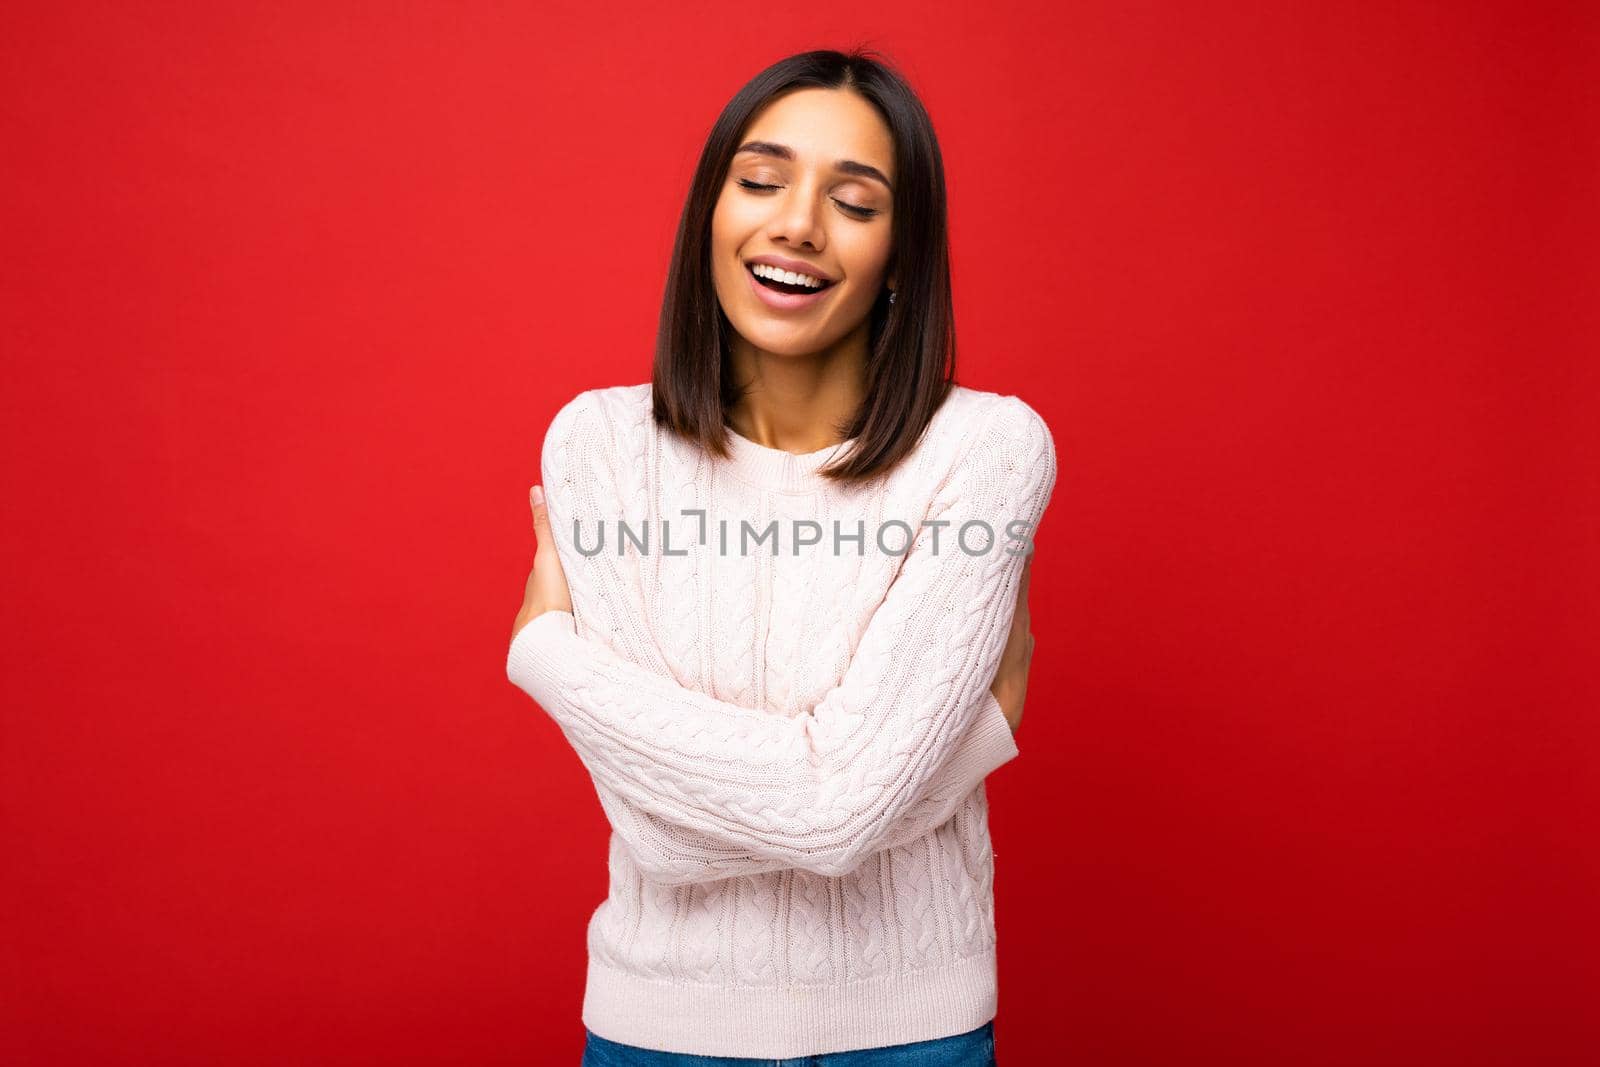 Portrait of positive cheerful cute smiling young brunette woman in casual sweater isolated on red background with copy space.